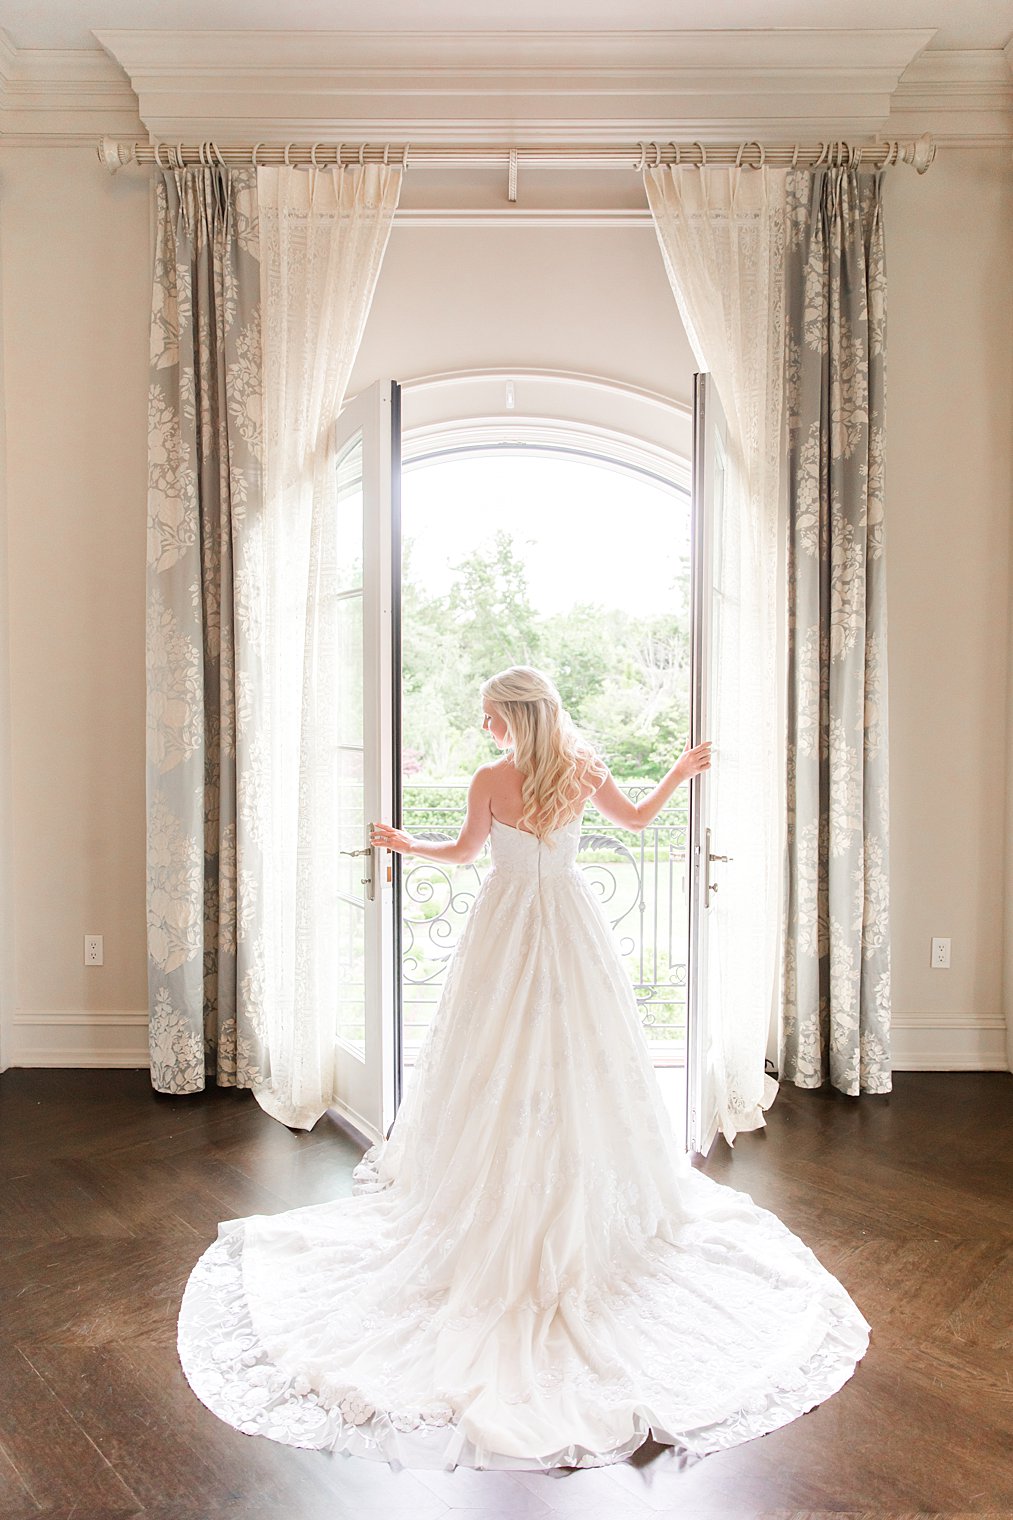 bride poses in bridal suite with train behind her looking out window